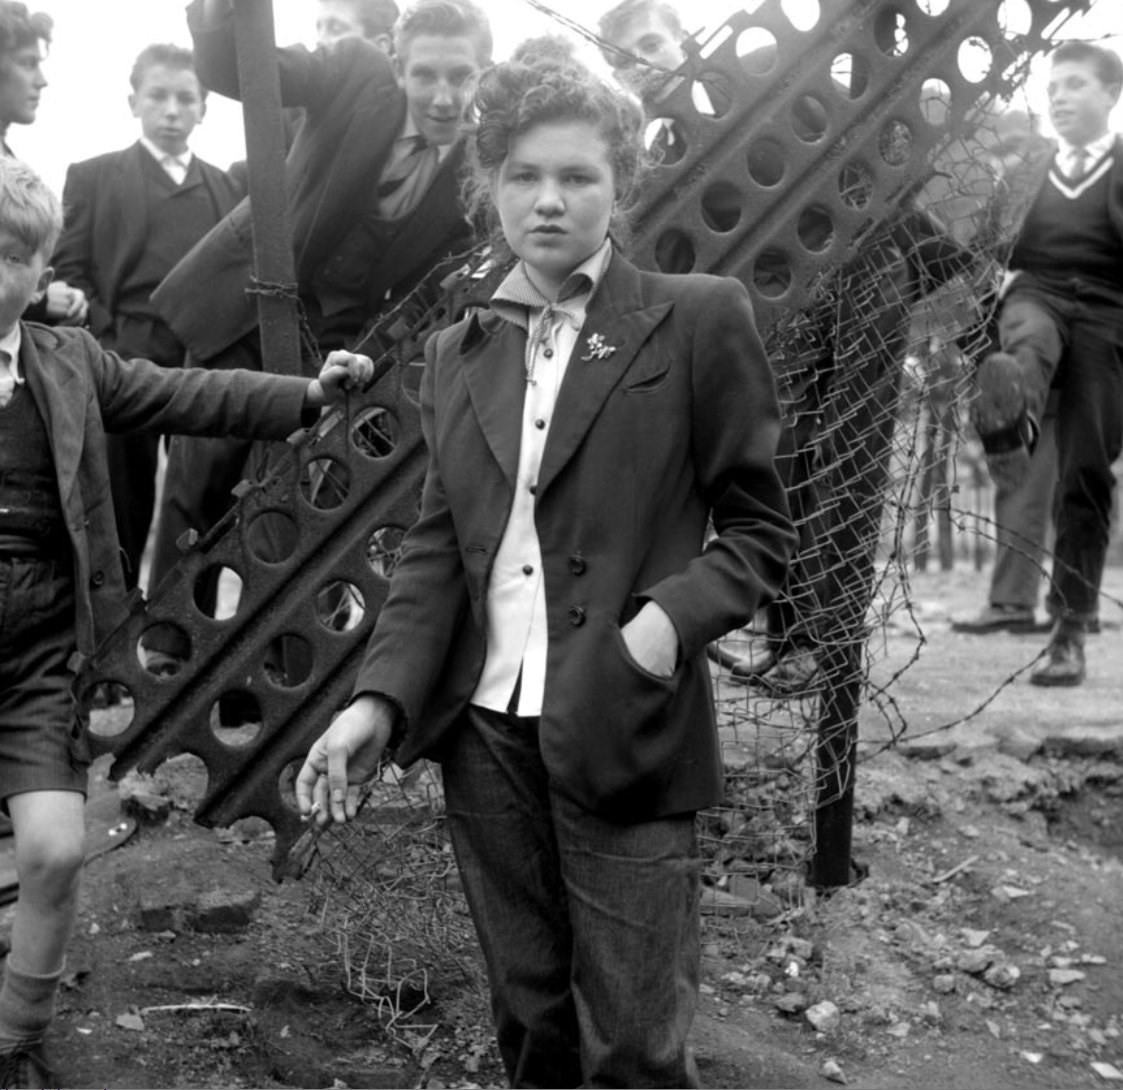 Teddy Girls: The Style Subculture That Time Forgot